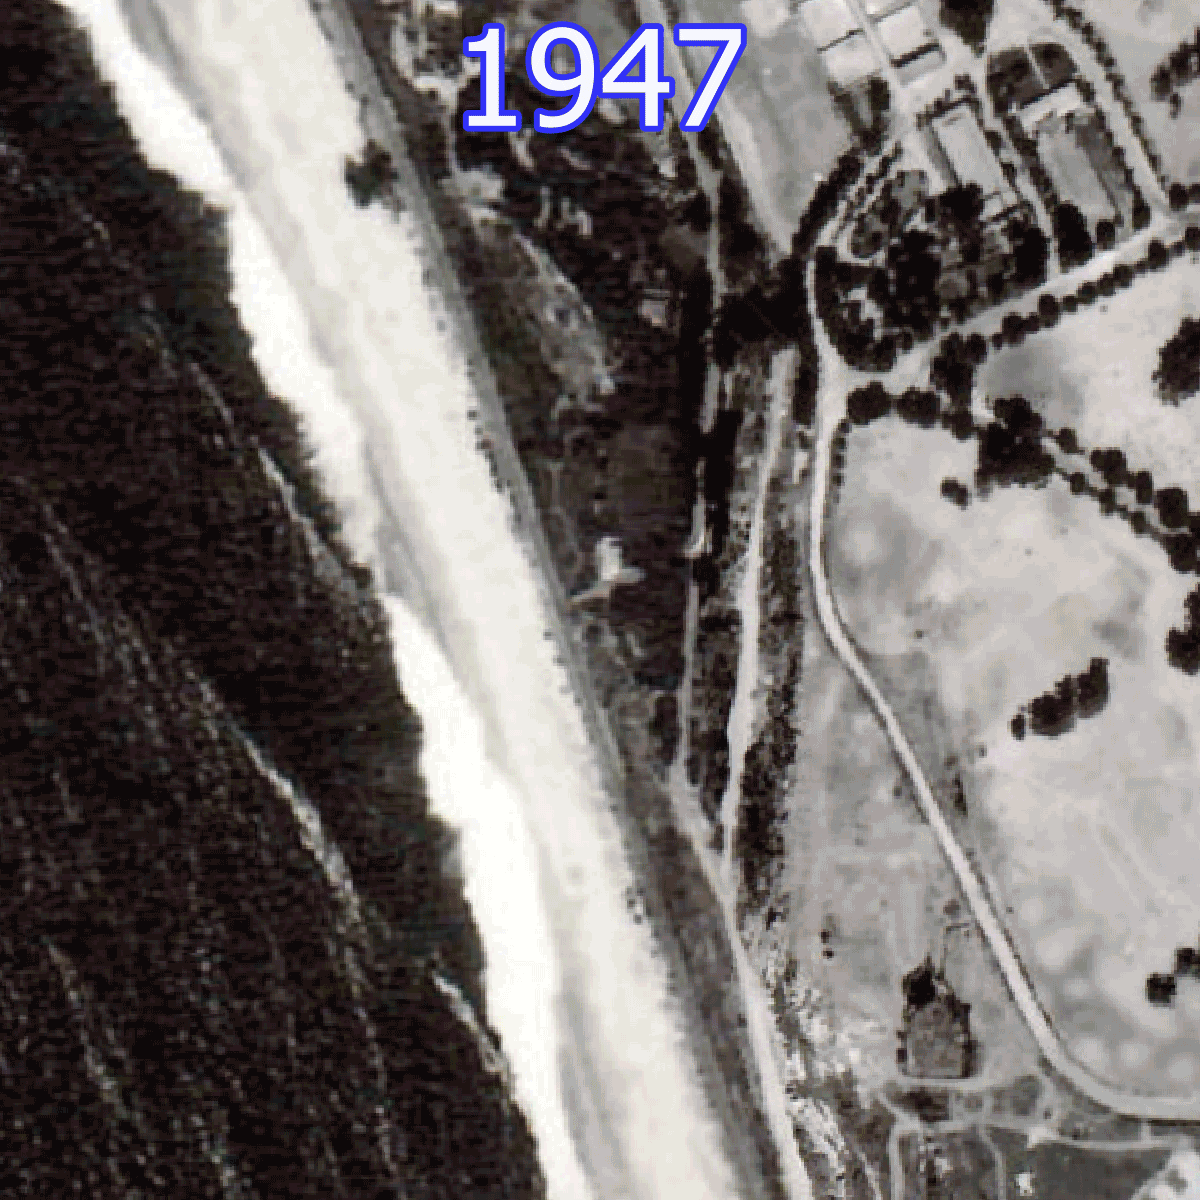 GIF of shoreline changes at San Clemente State Beach since 1947, showing the beach shrinking